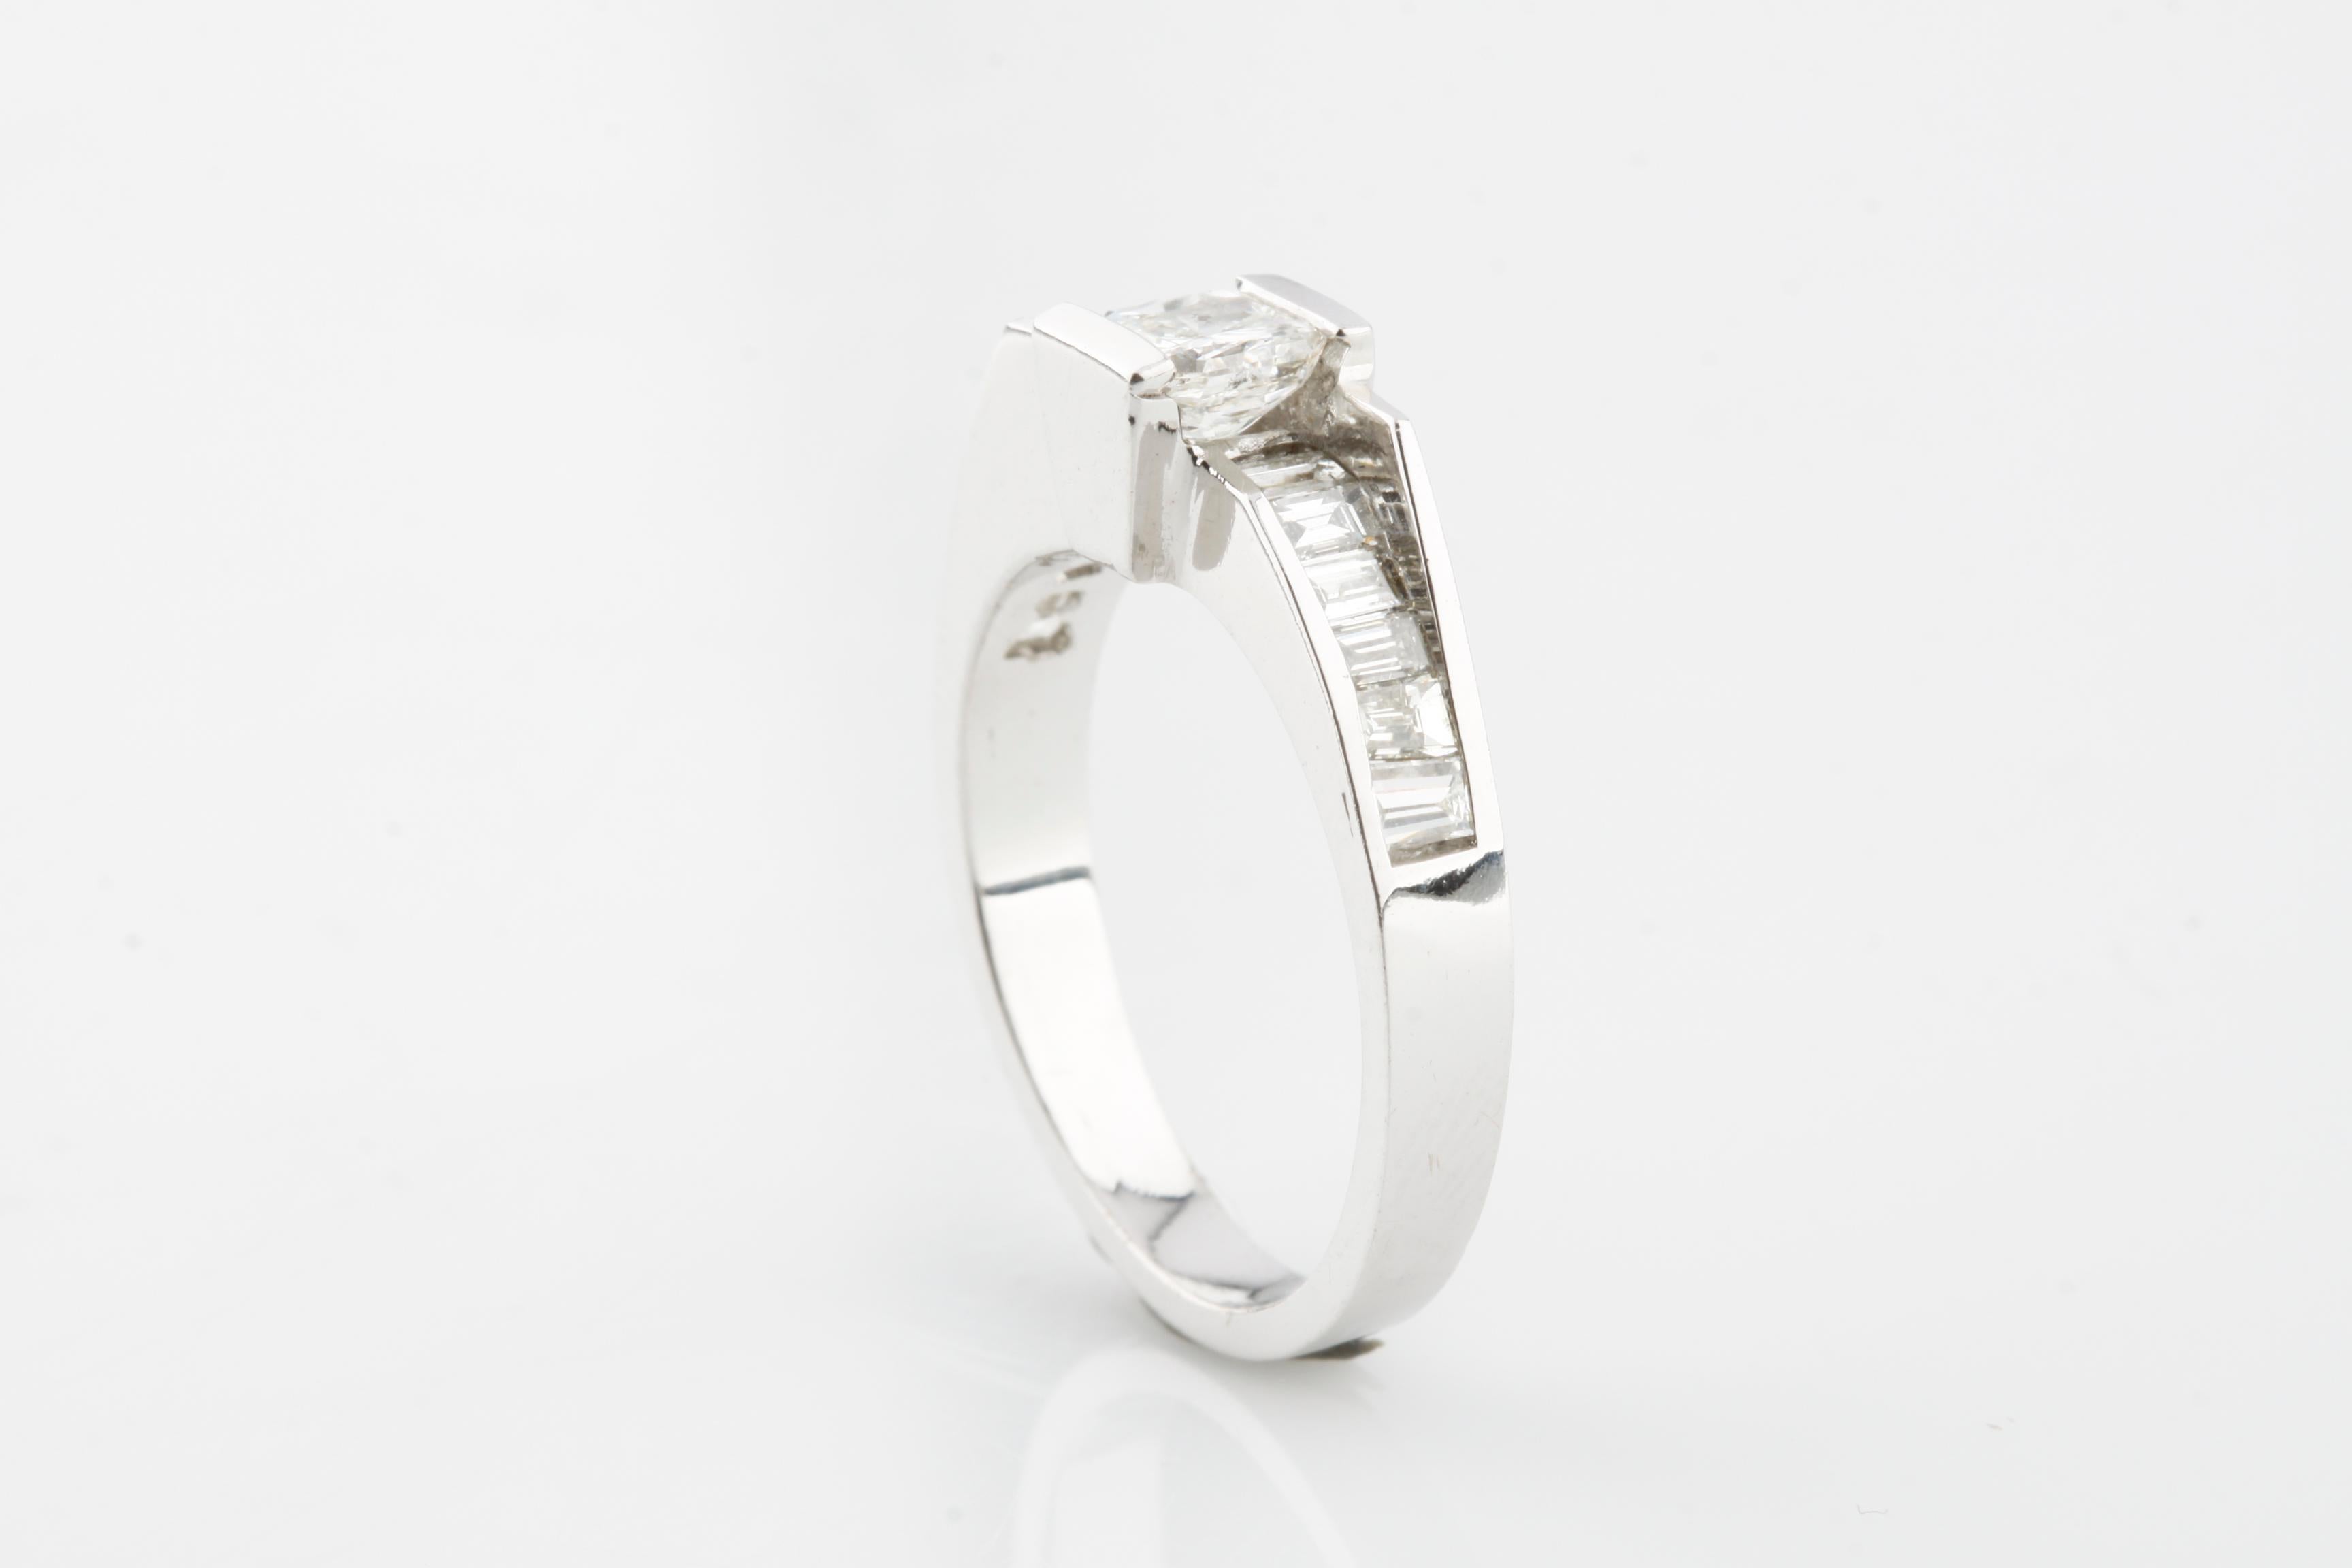 One electronically tested 18KT white gold ladies cast diamond ring with a bright finish.
Condition is good.
Featuring a diamond solitaire supported by diamond set shoulders
Completed by a three millimeter wide band.
Size 6
Identified with markings